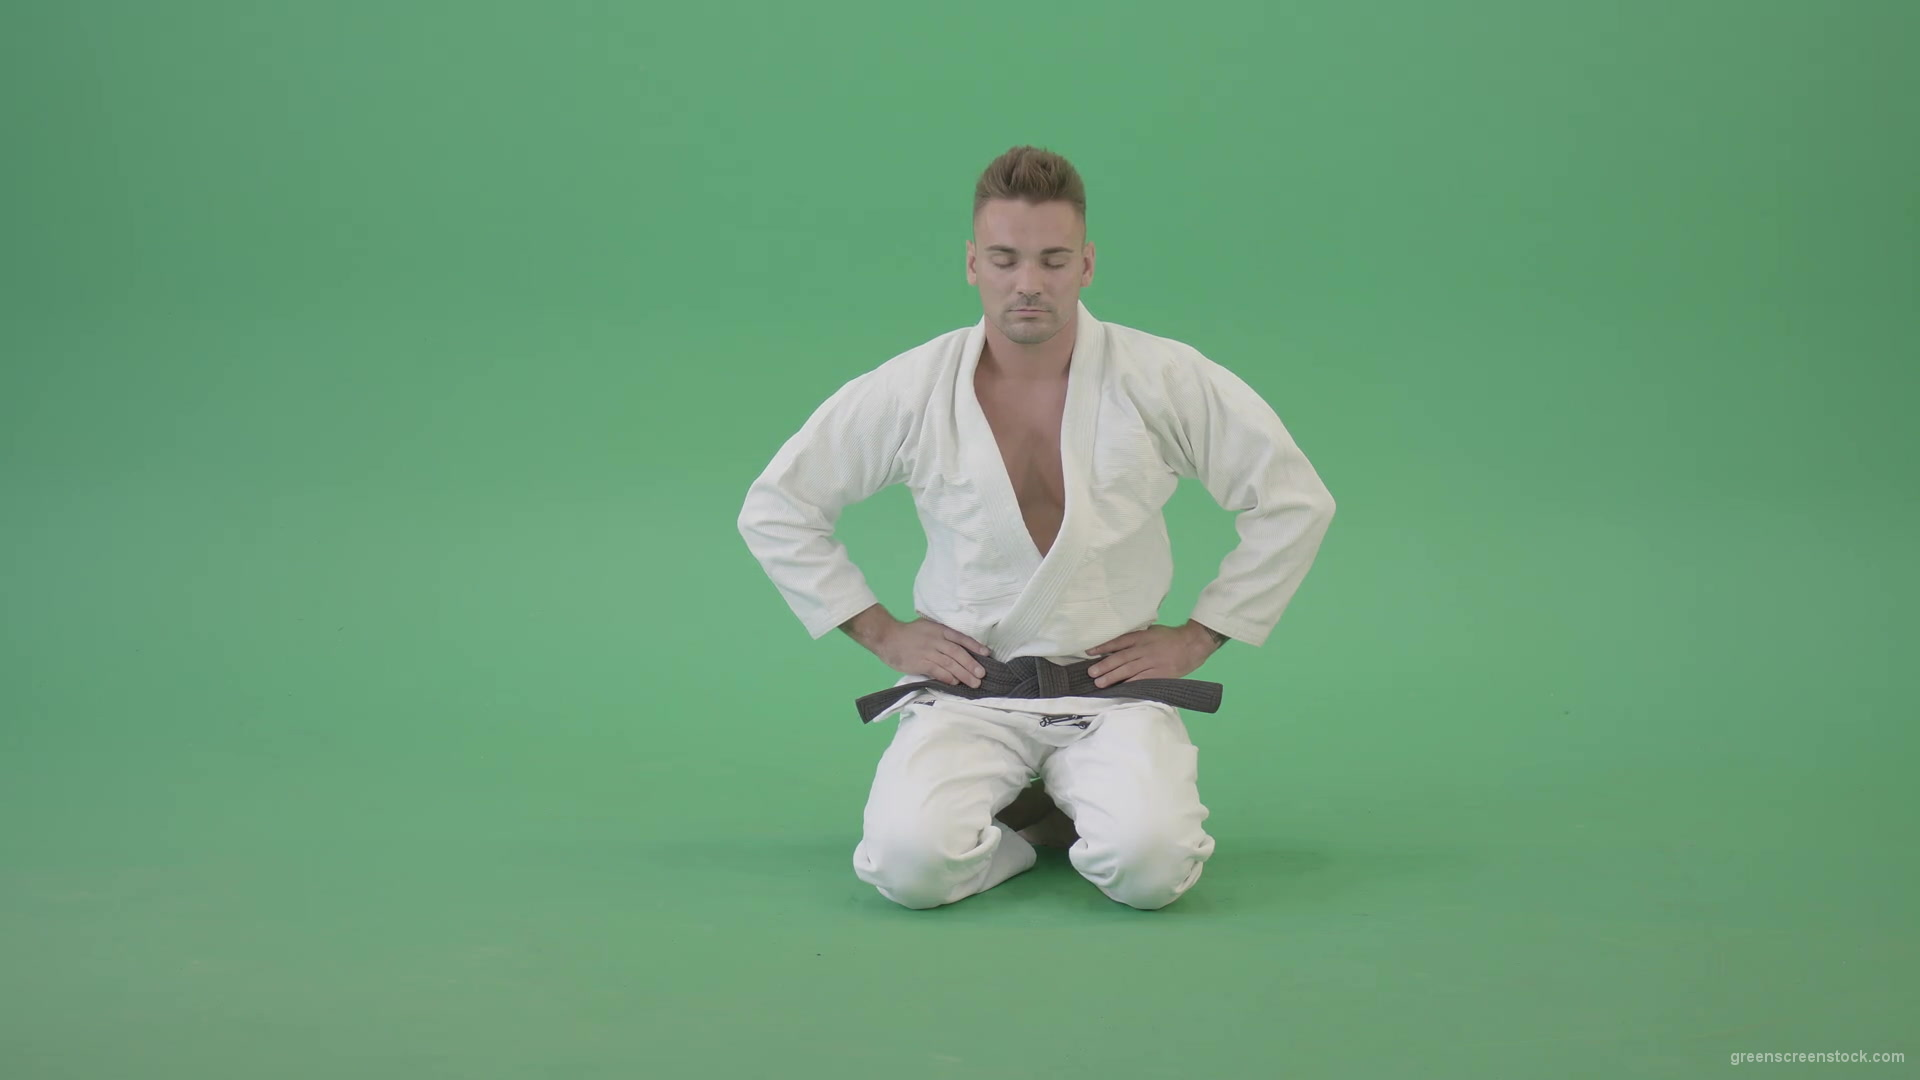 Jujutsu-Sport-man-meditating-and-breathing-slowly-isolated-on-green-screen-4K-Video-Footage-1920_002 Green Screen Stock